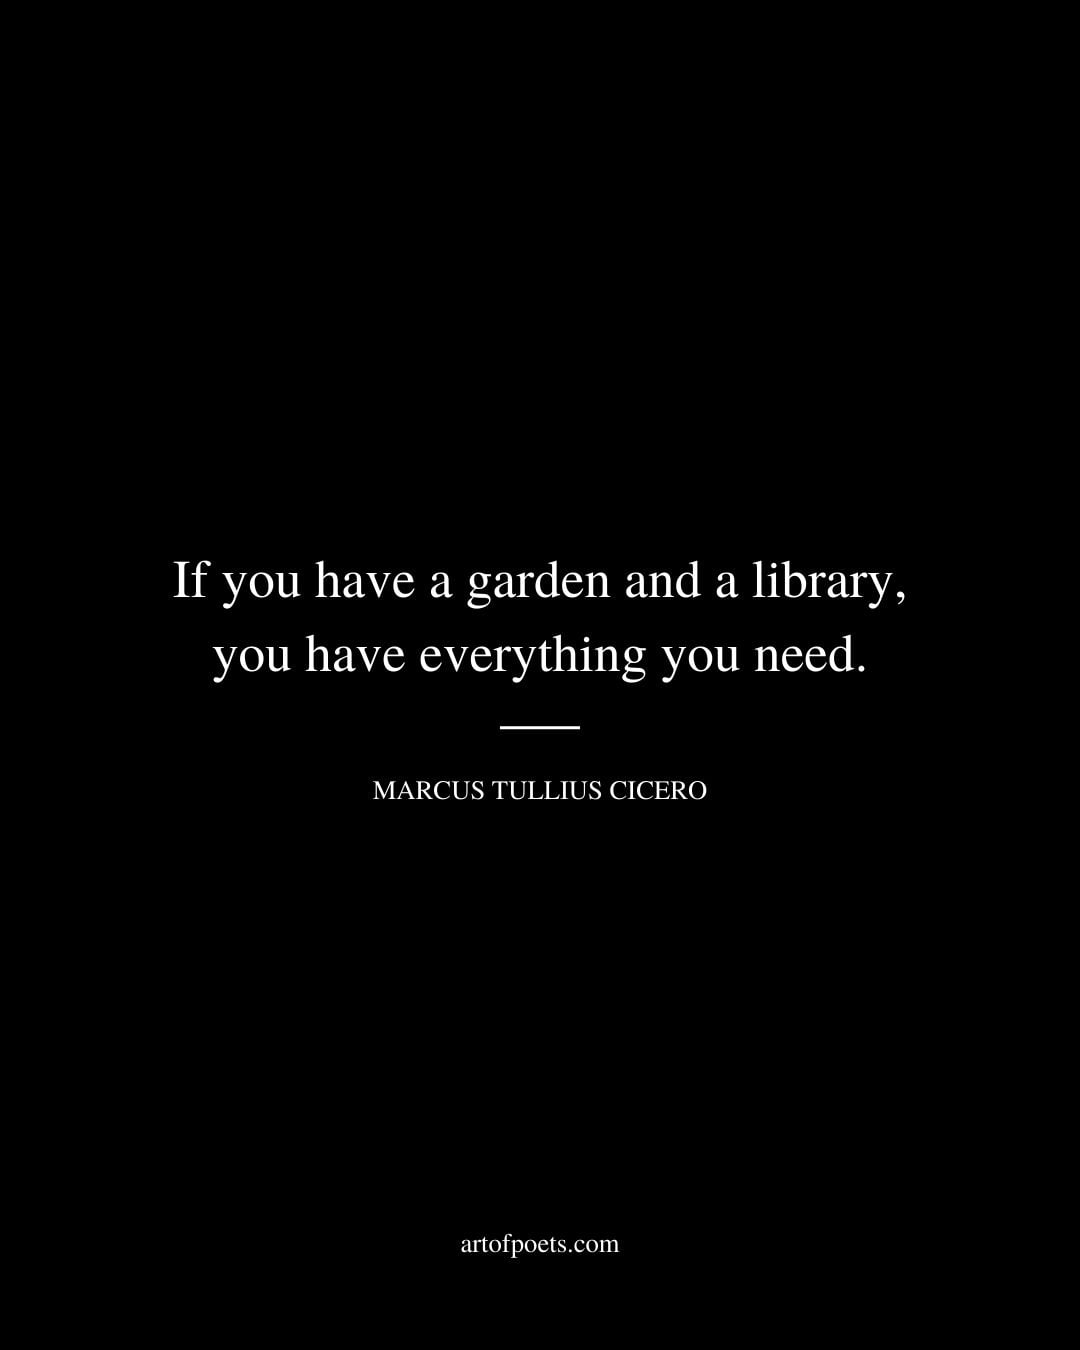 If you have a garden and a library you have everything you need. Marcus Tullius Cicero